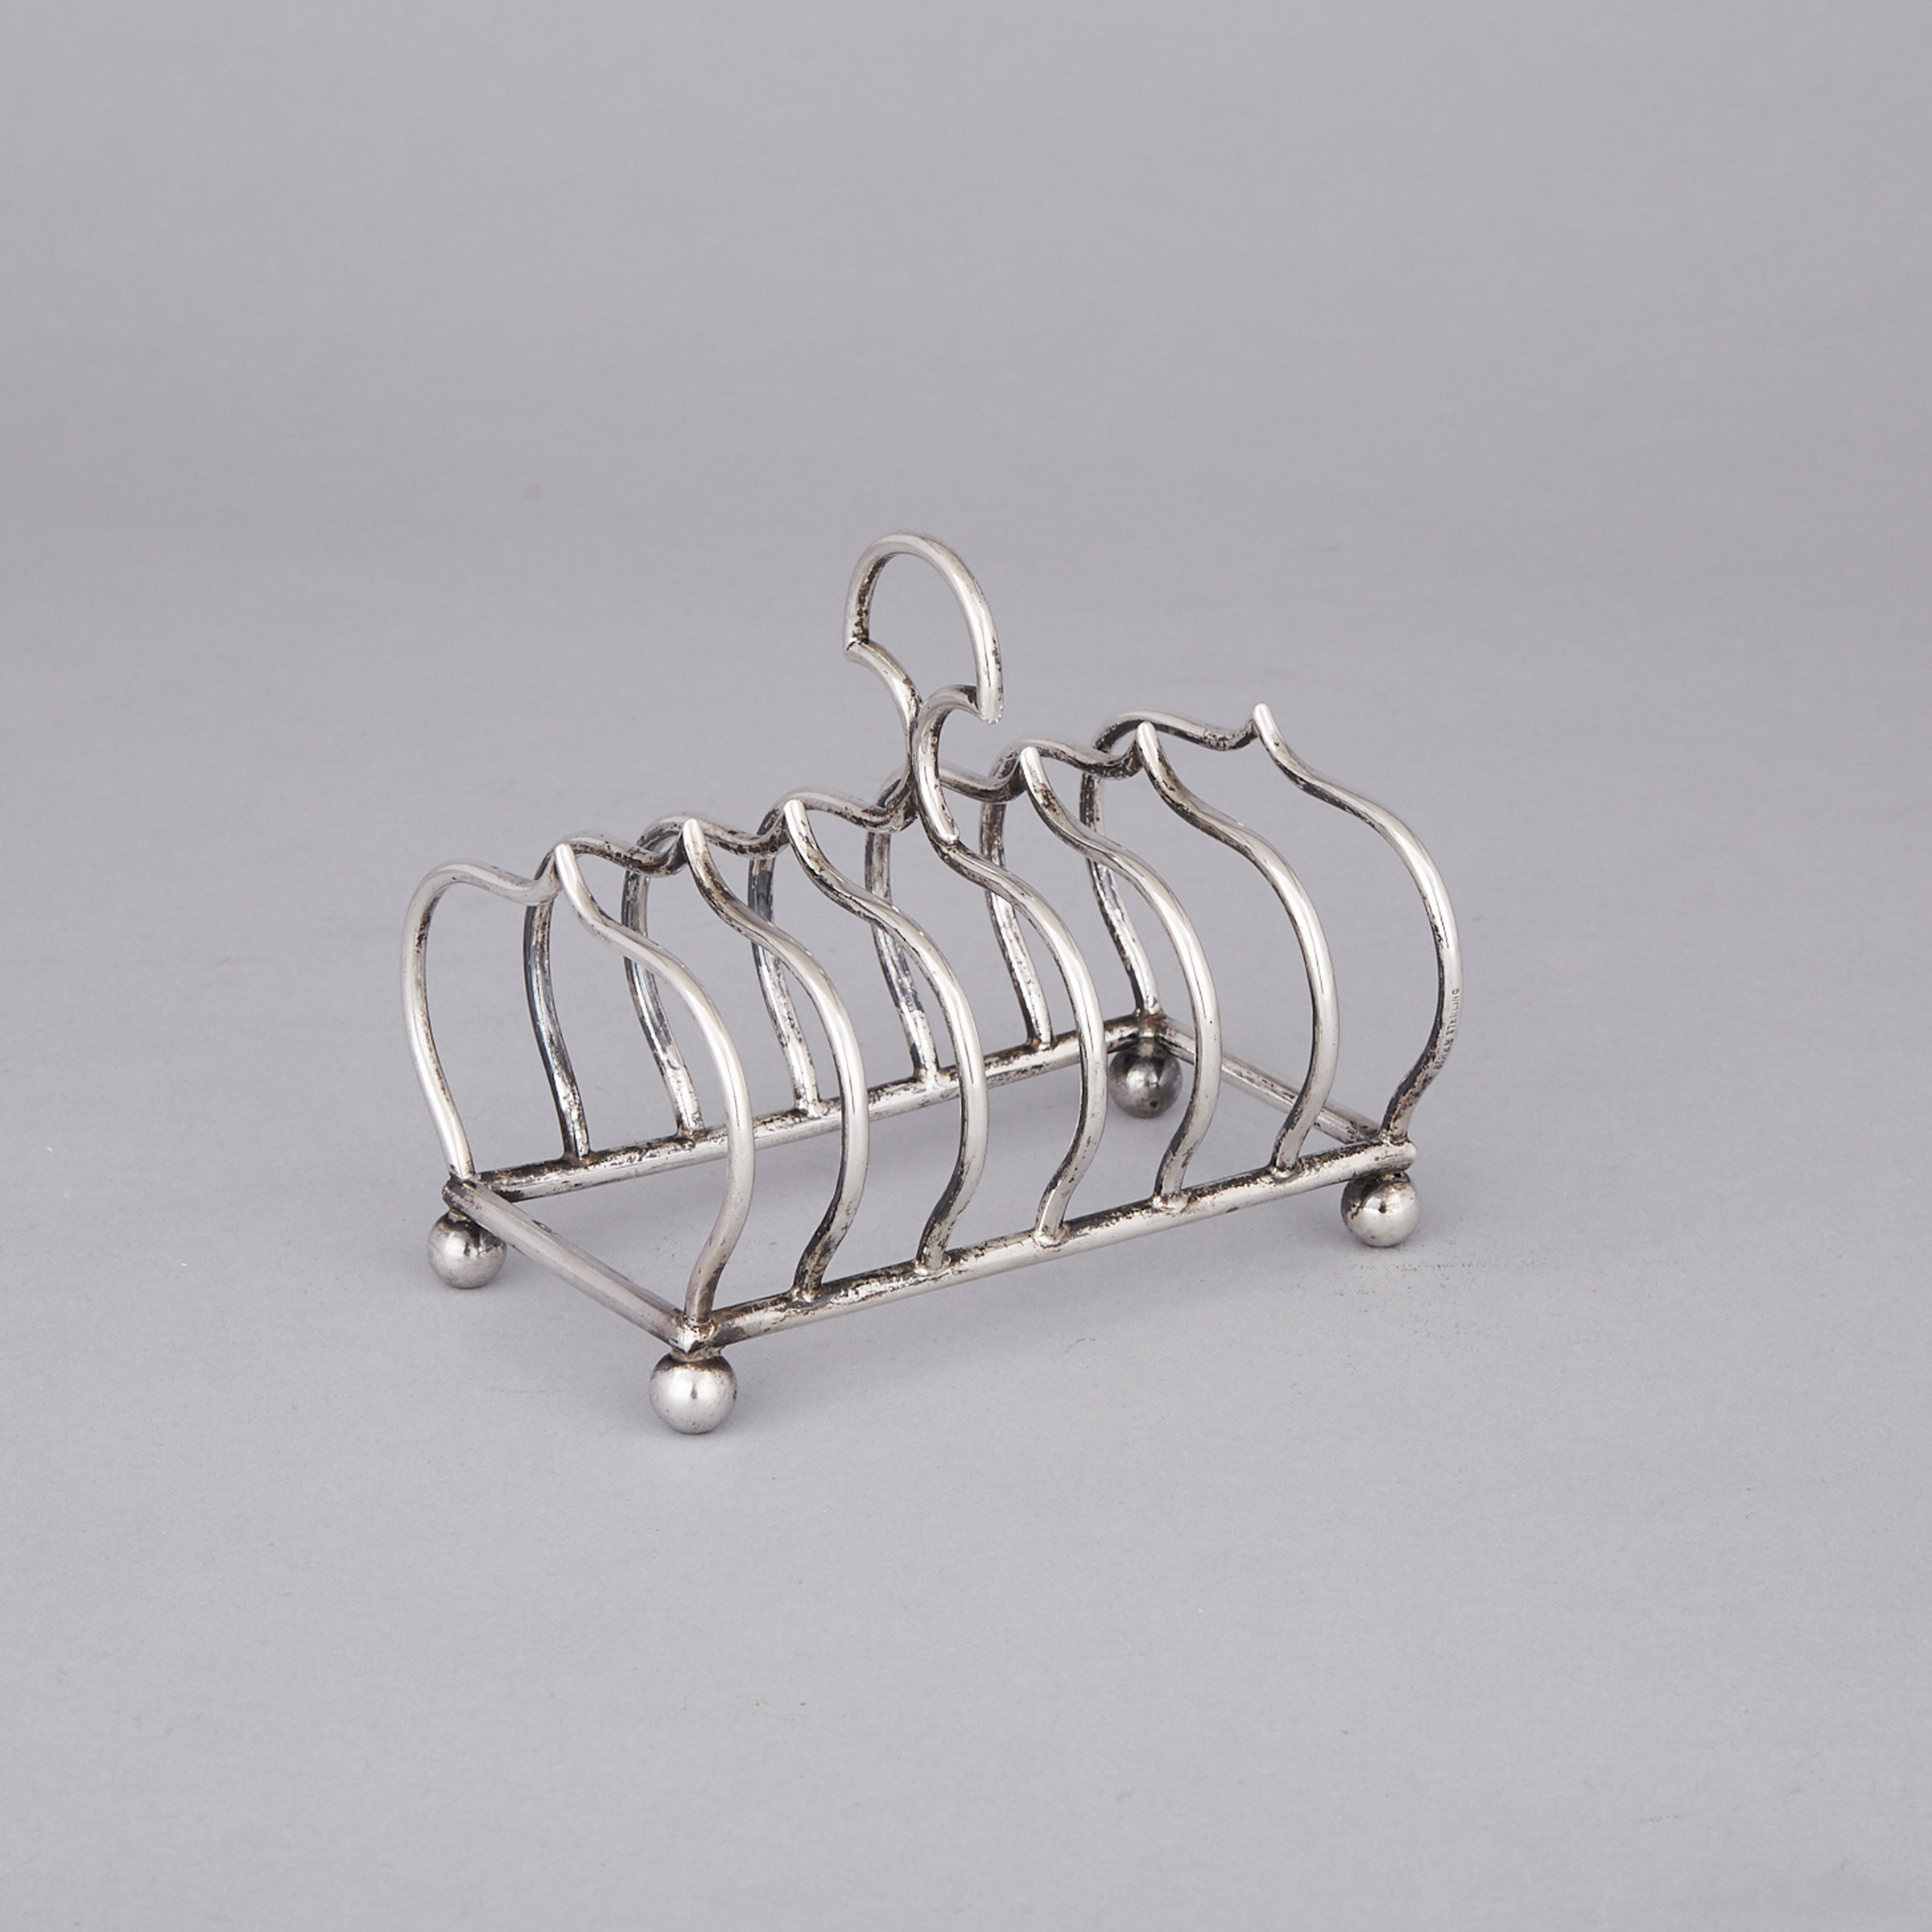 Canadian Silver Seven-Bar Toast Rack, Henry Birks & Sons, Montreal, Que,. c.1904-24